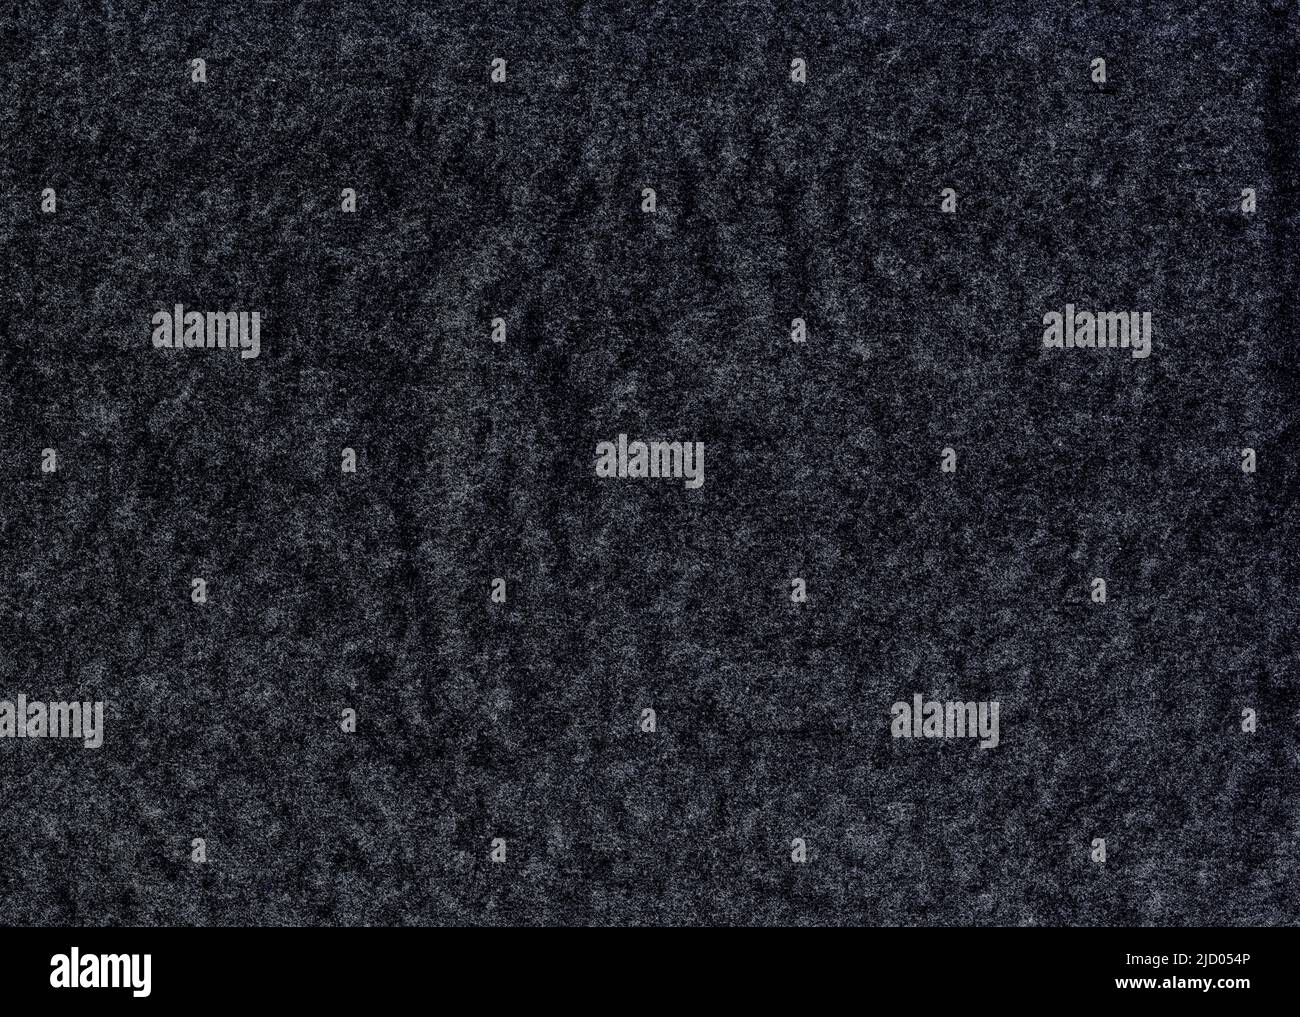 High detail large image of rough, uncoated, black, gray paper texture background scan grunge wallpaper pronounced fiber grain and particles distinguis Stock Photo